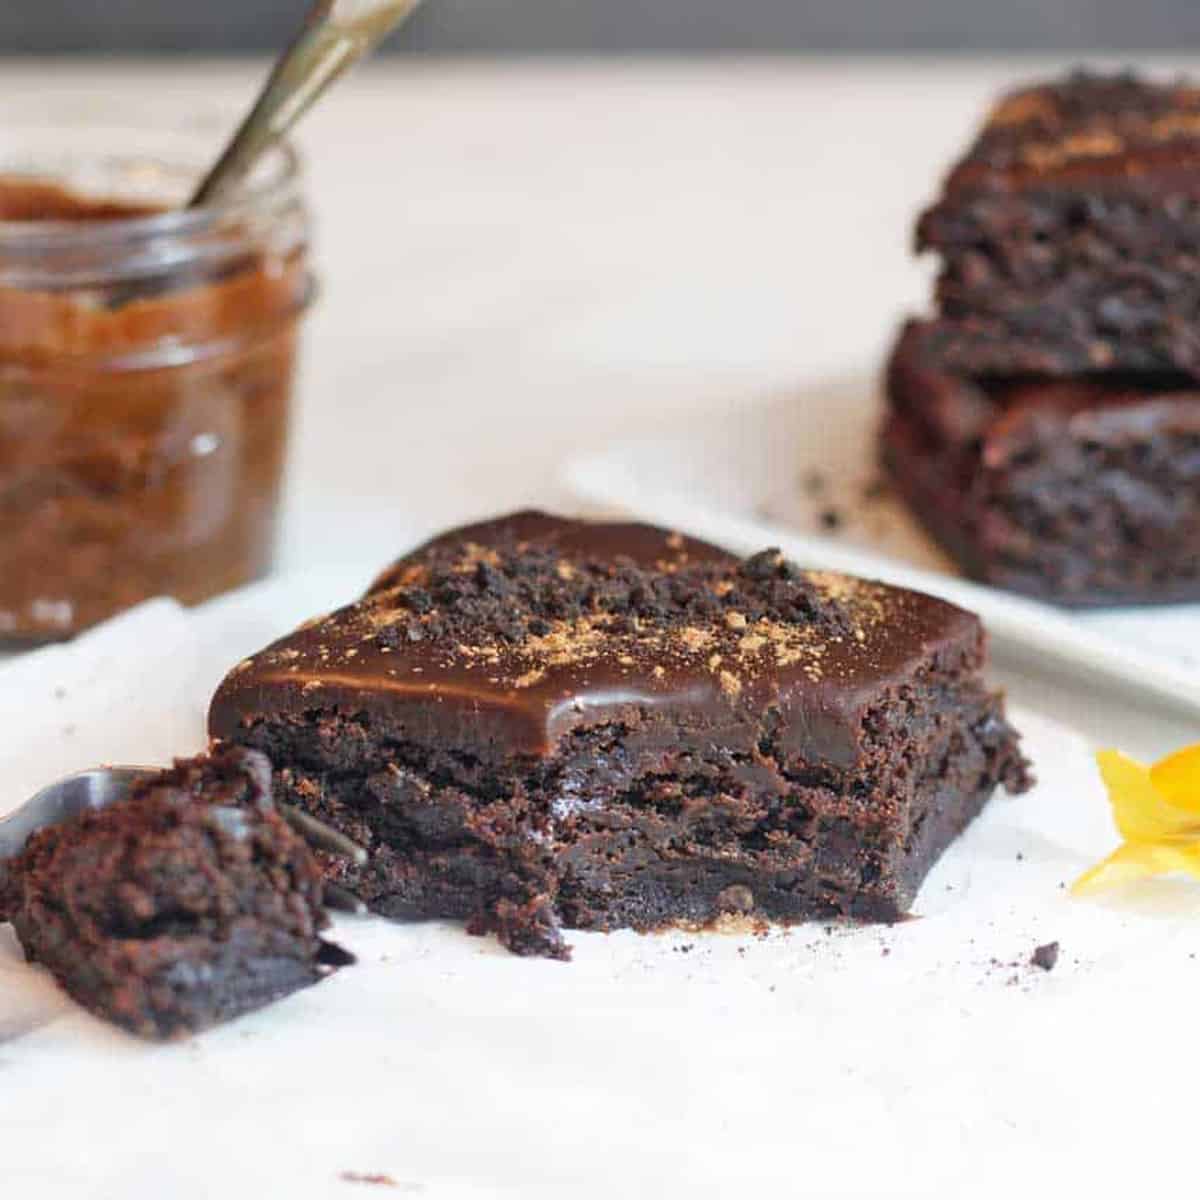 a brownie with a bite on a table with a jar of date paste